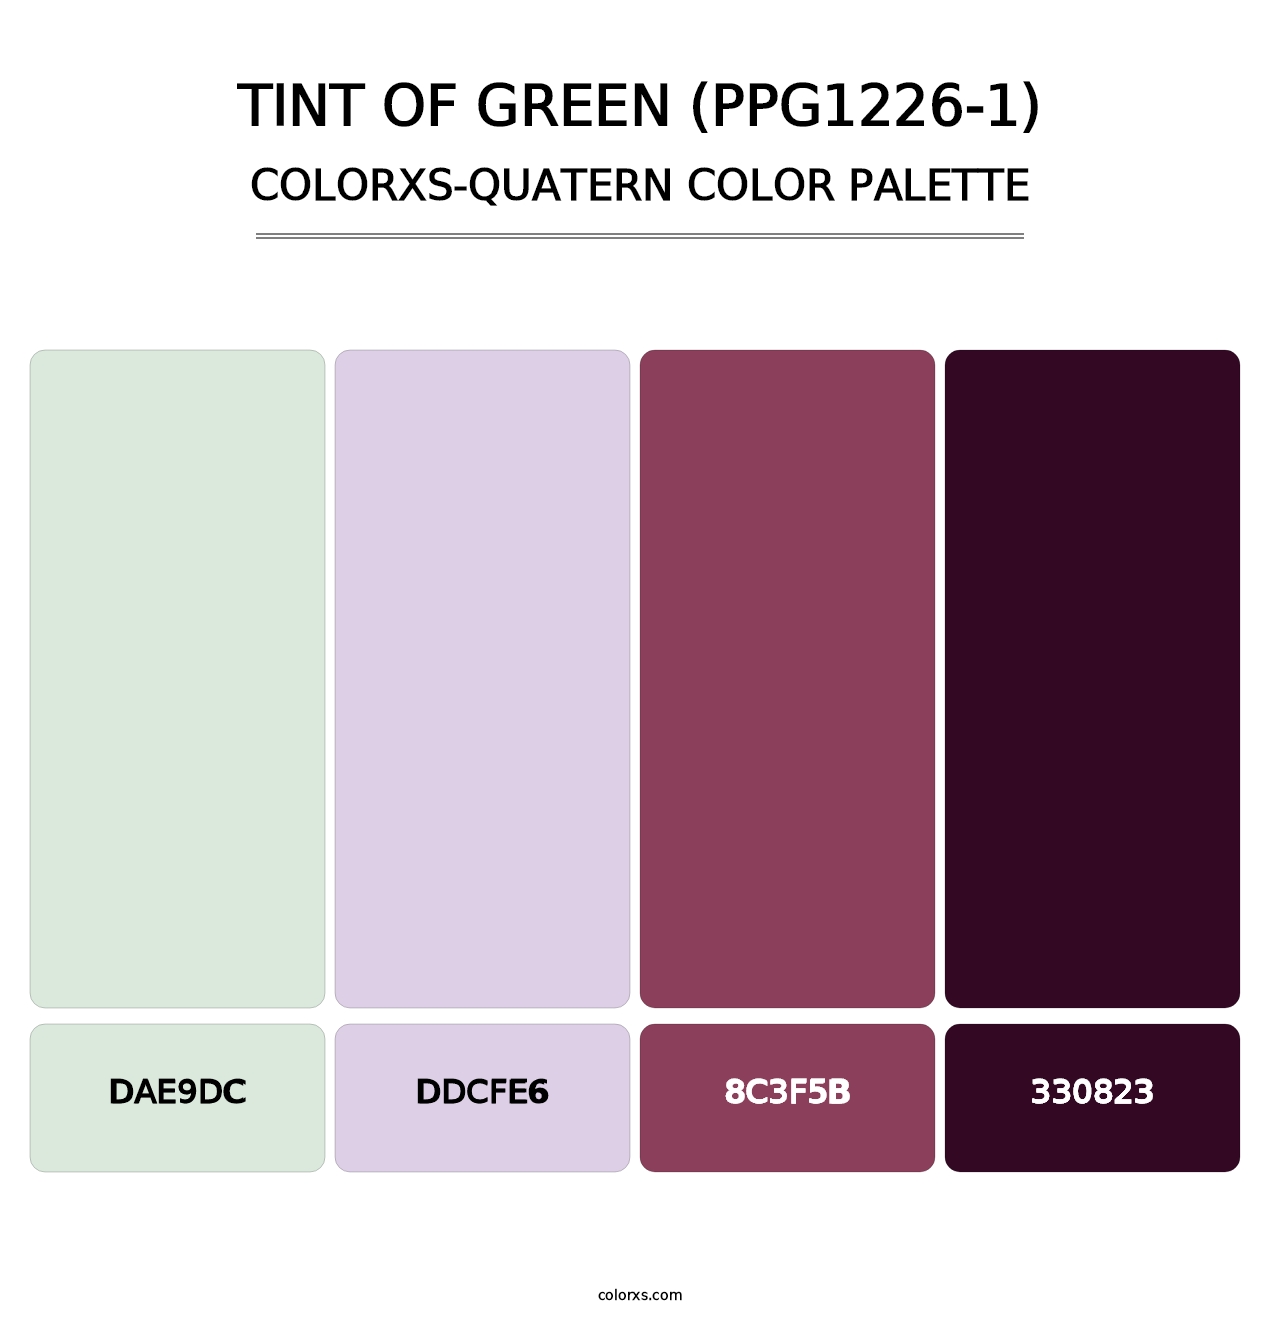 Tint Of Green (PPG1226-1) - Colorxs Quatern Palette